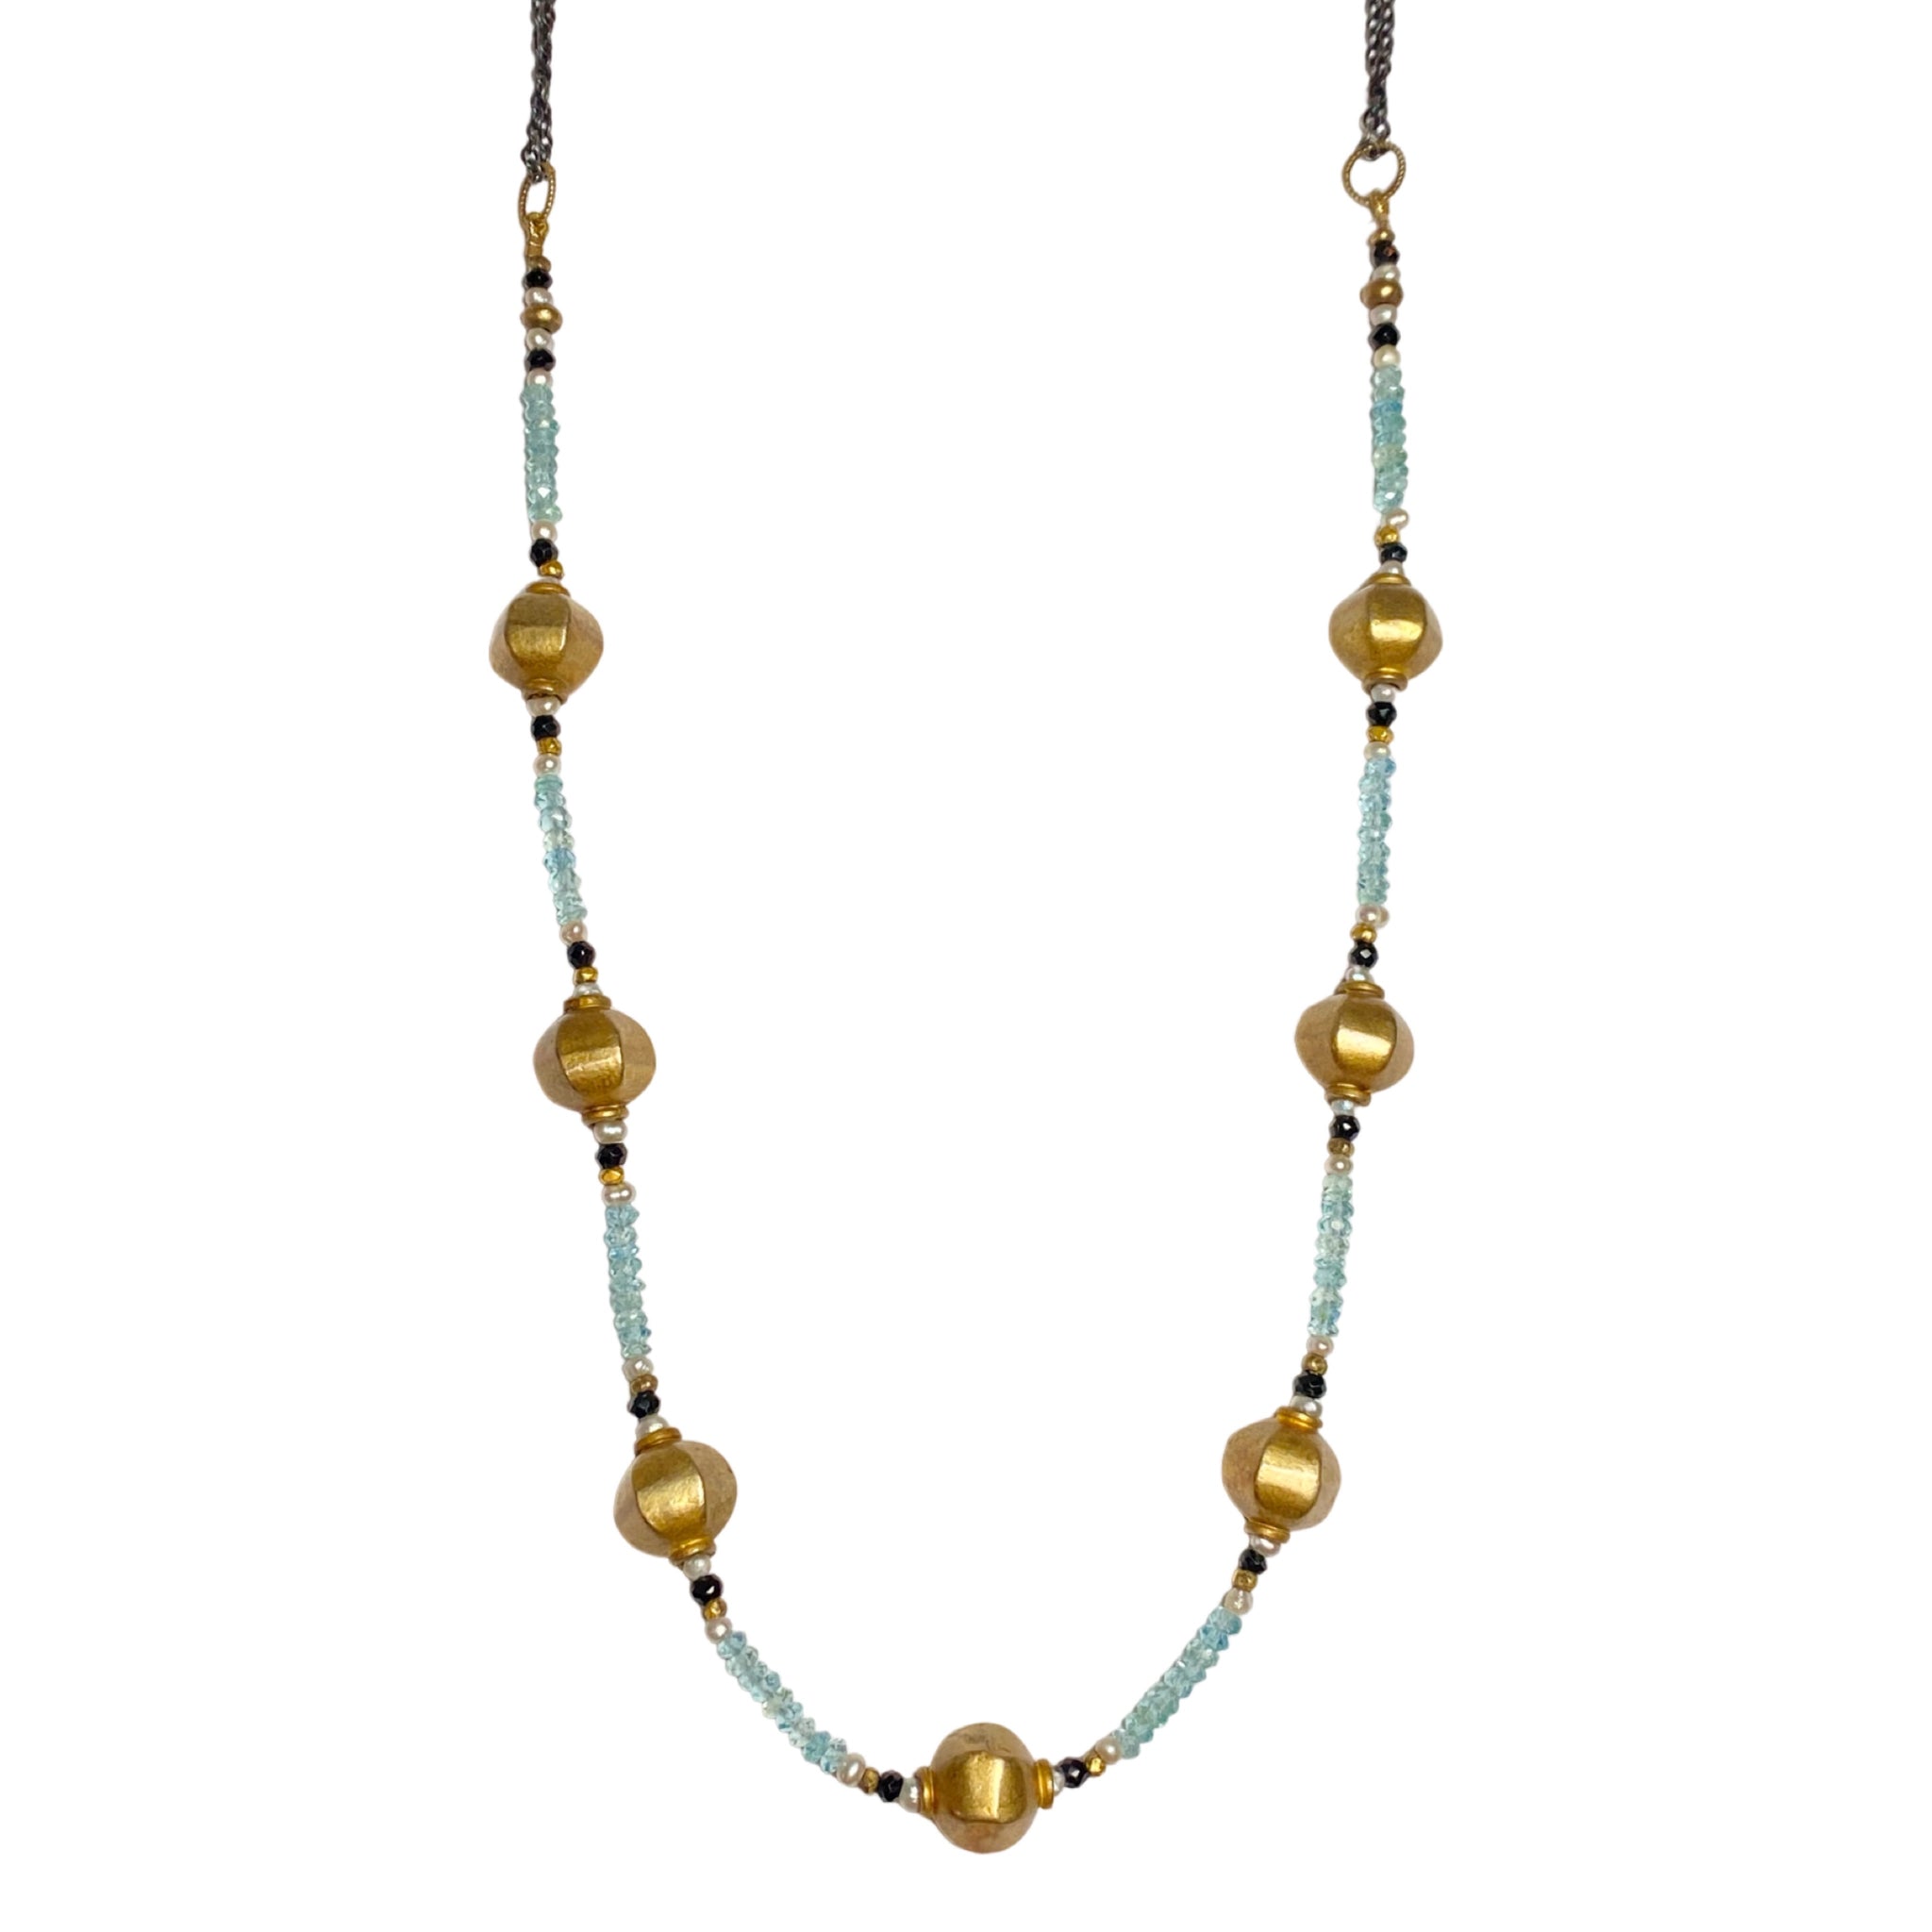 Lulu Designs' lantern necklace is substantial enough to stand on its sown or makes a fantastic layering piece. In-between the bronze sculpted lanterns are alternating faceted beads of blue zircon, onyx and fresh water pearls. Available at Shaylula Jewlery & Gifts in Tarrytown, NY and online.  • Yellow bronze, blue zircon, onyx, fresh water pearl, 18k gold vermeil  • 19" - 20" L adjustable  • Lobster clasp